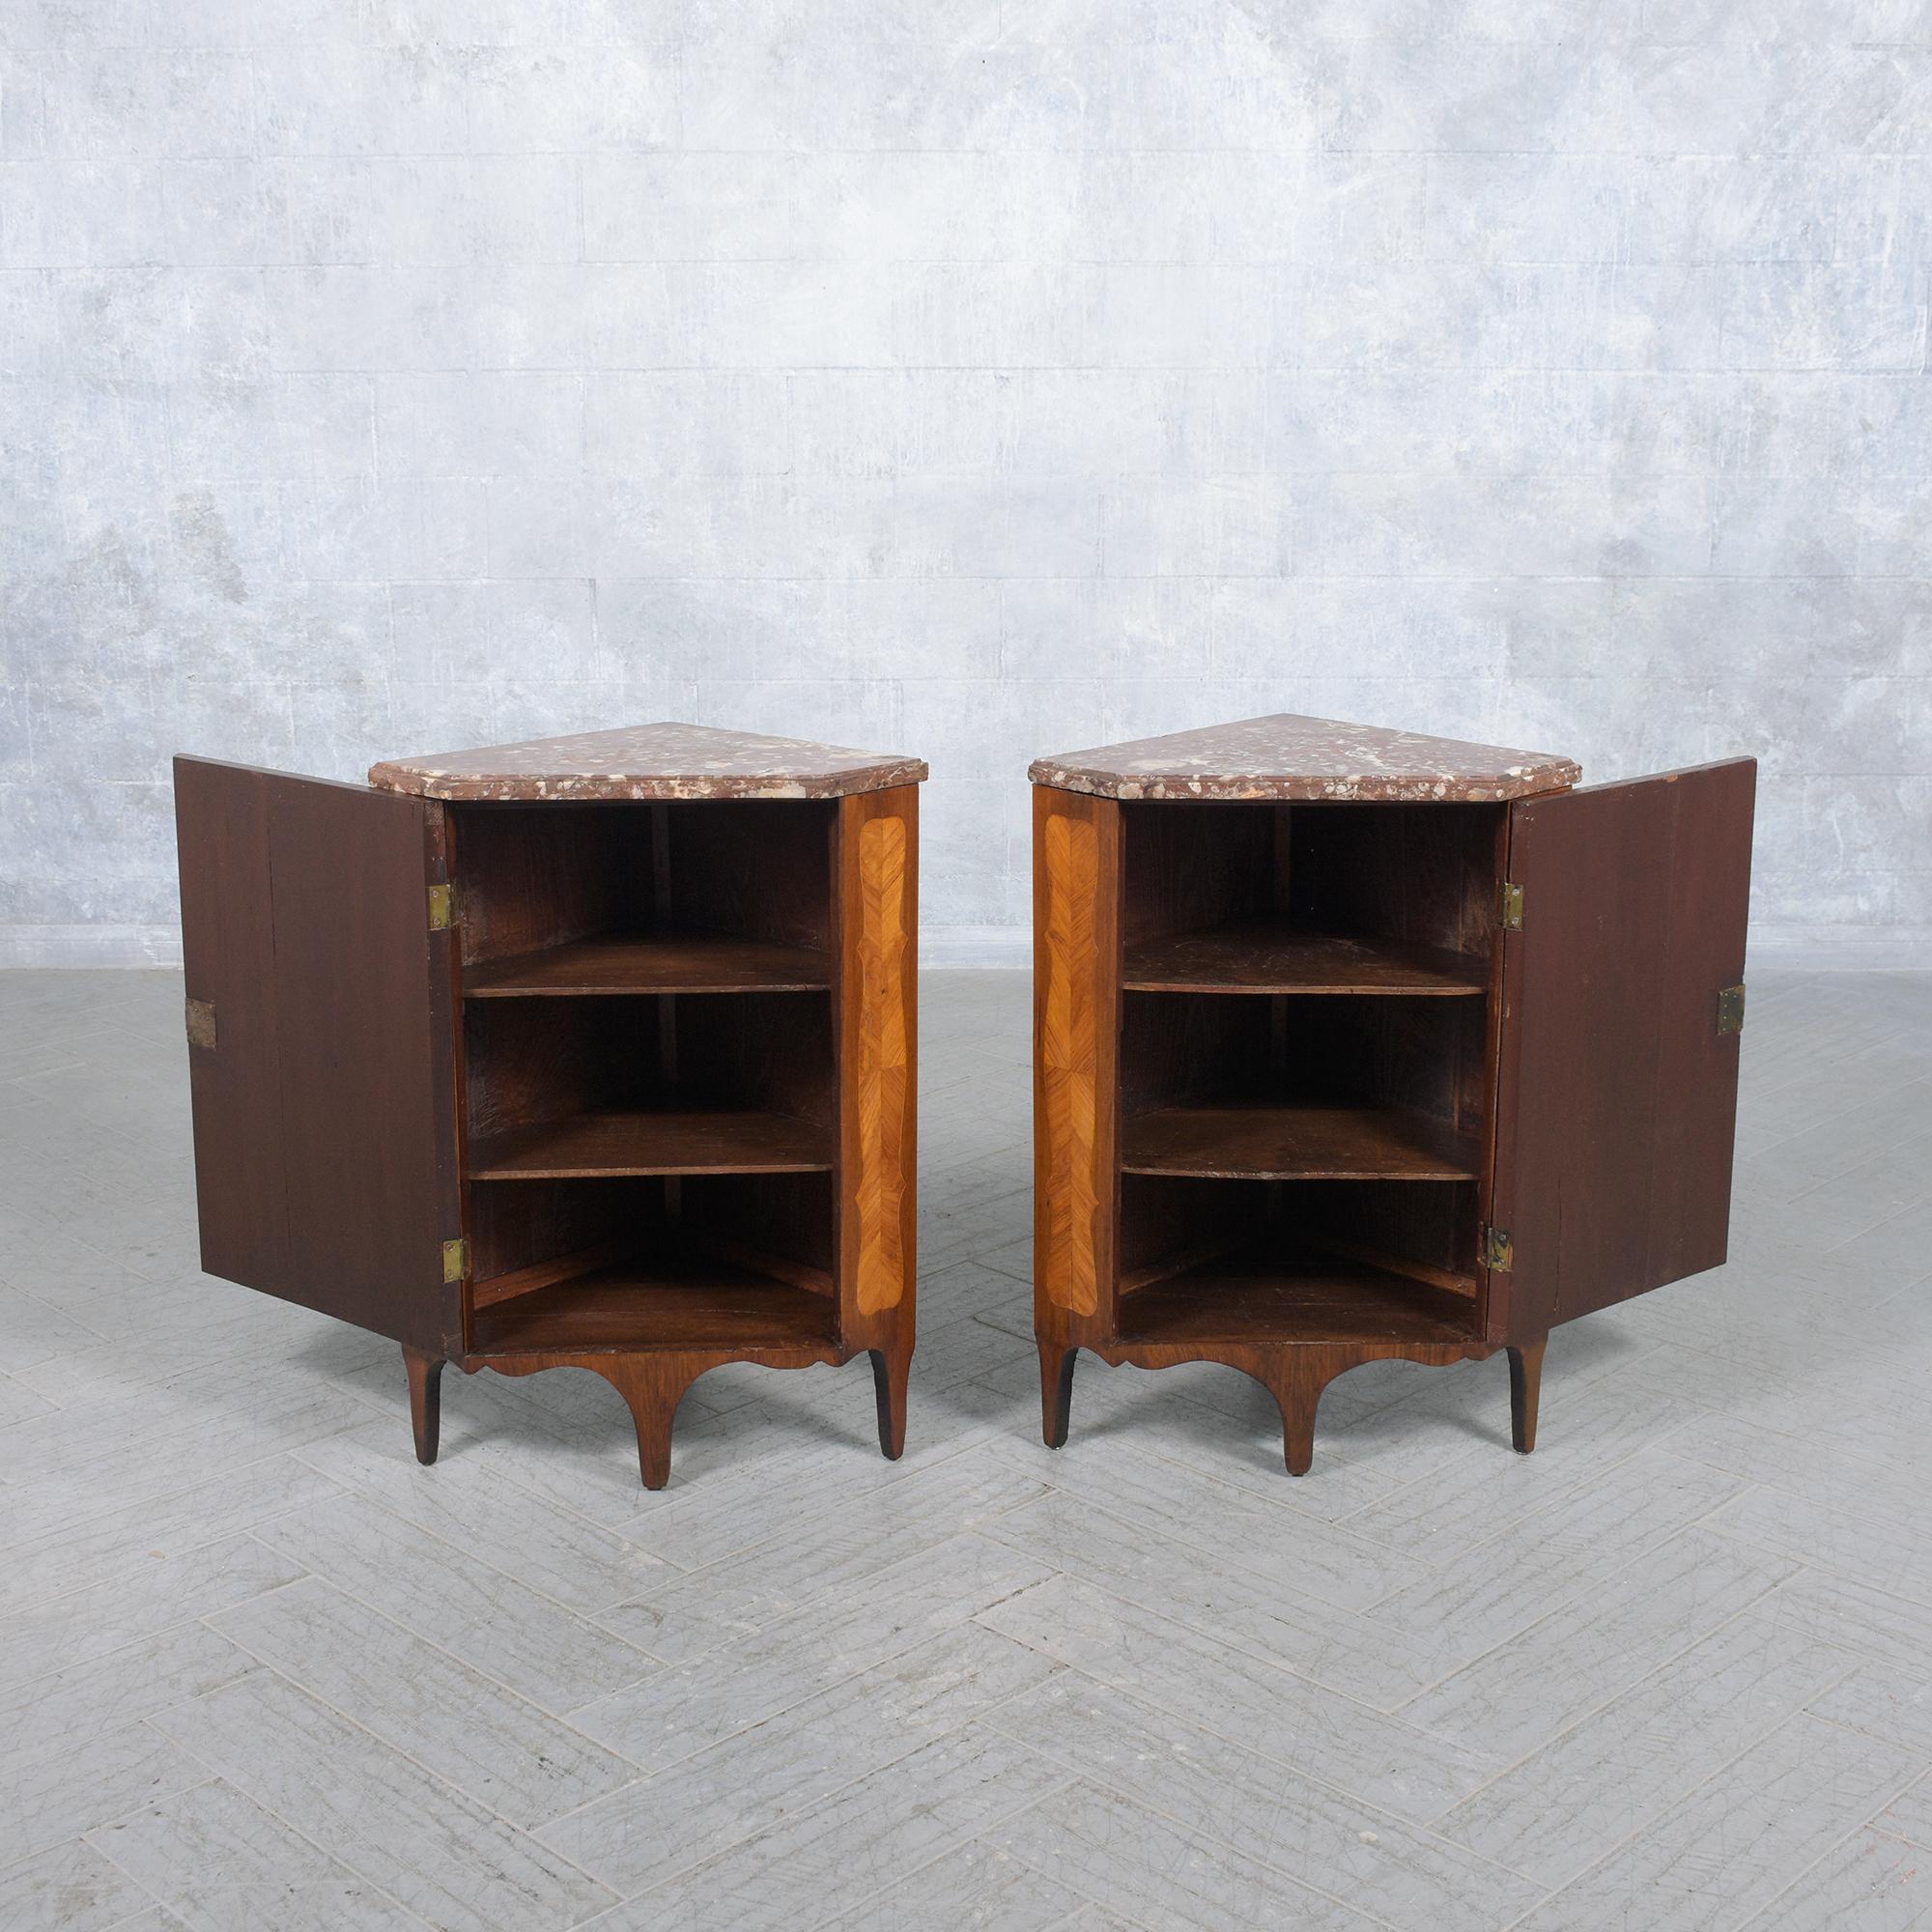 Late 18th-Century French Corner Cabinets with Marble Tops: Restored Elegance For Sale 1